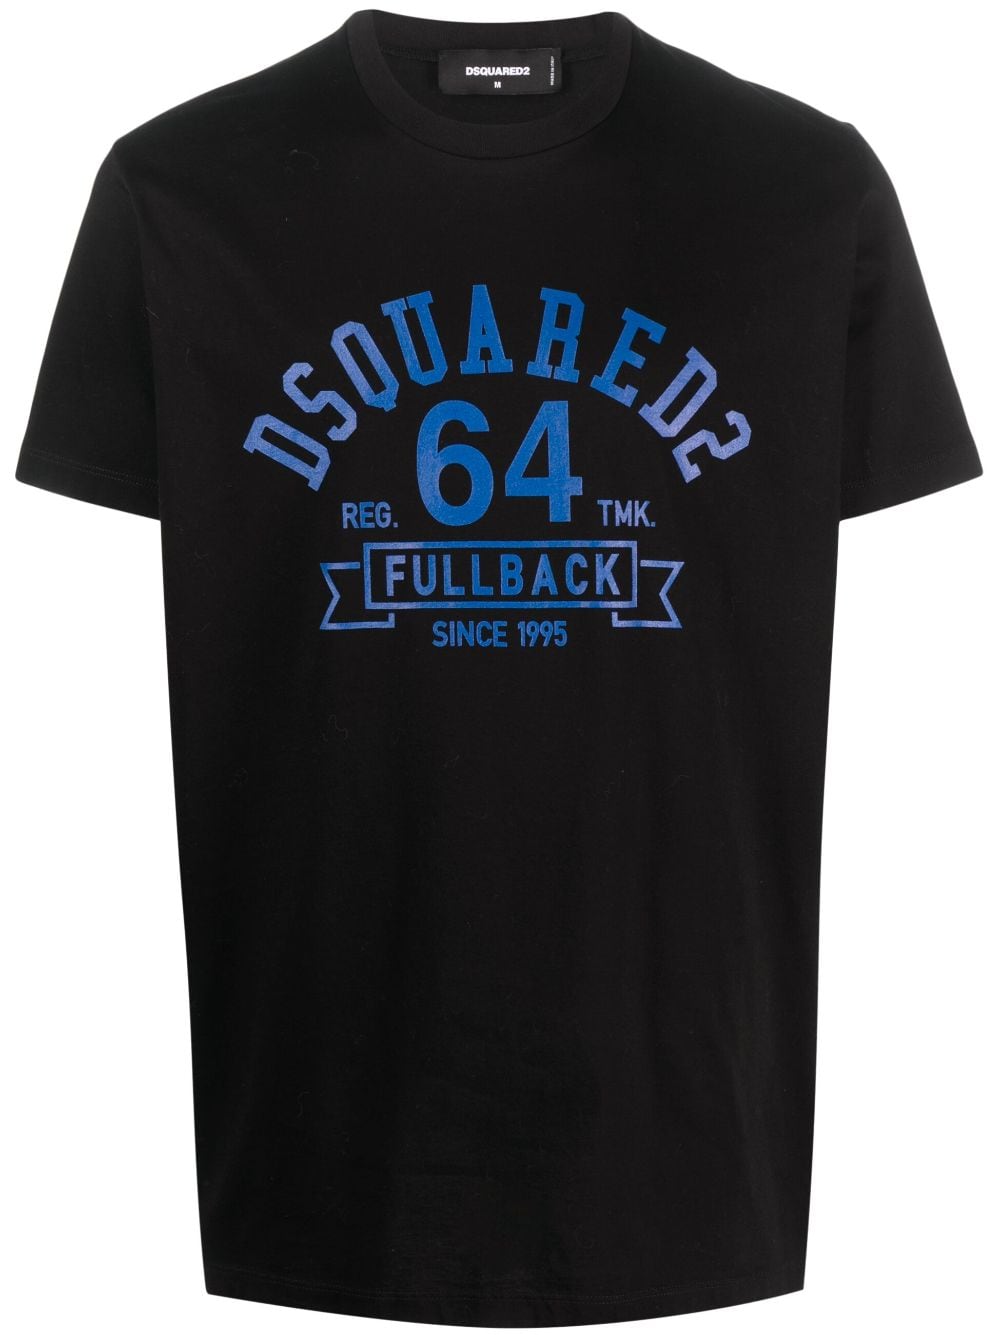 Dsquared2 Graphic-print Cotton T-shirt In Black